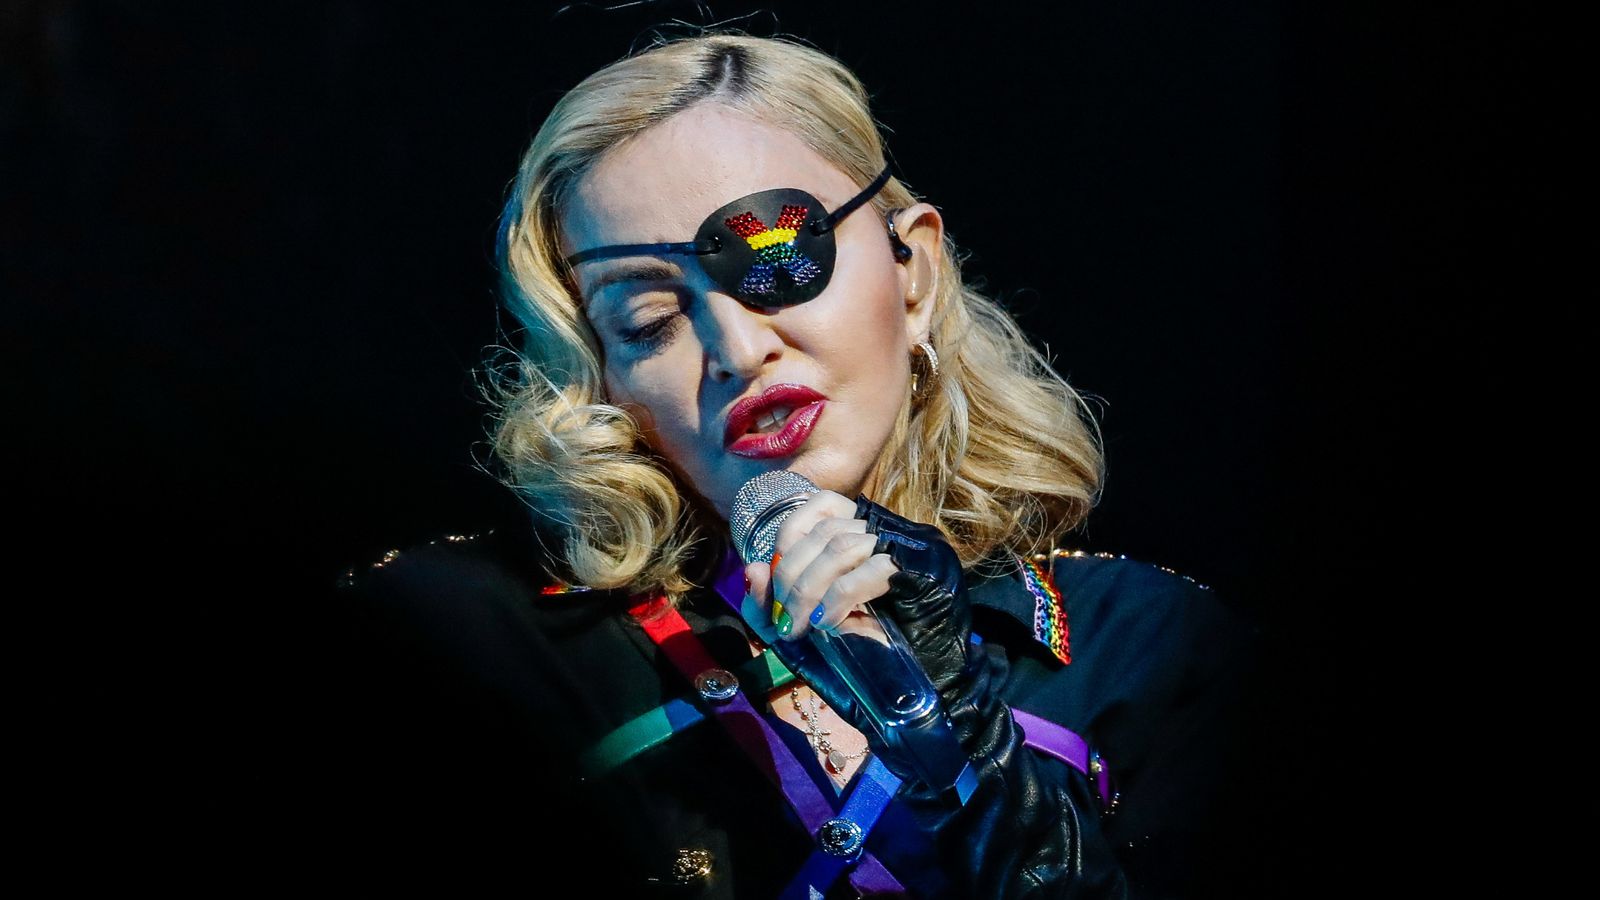 Madonna to kick off rescheduled Celebration world tour in UK after health scare